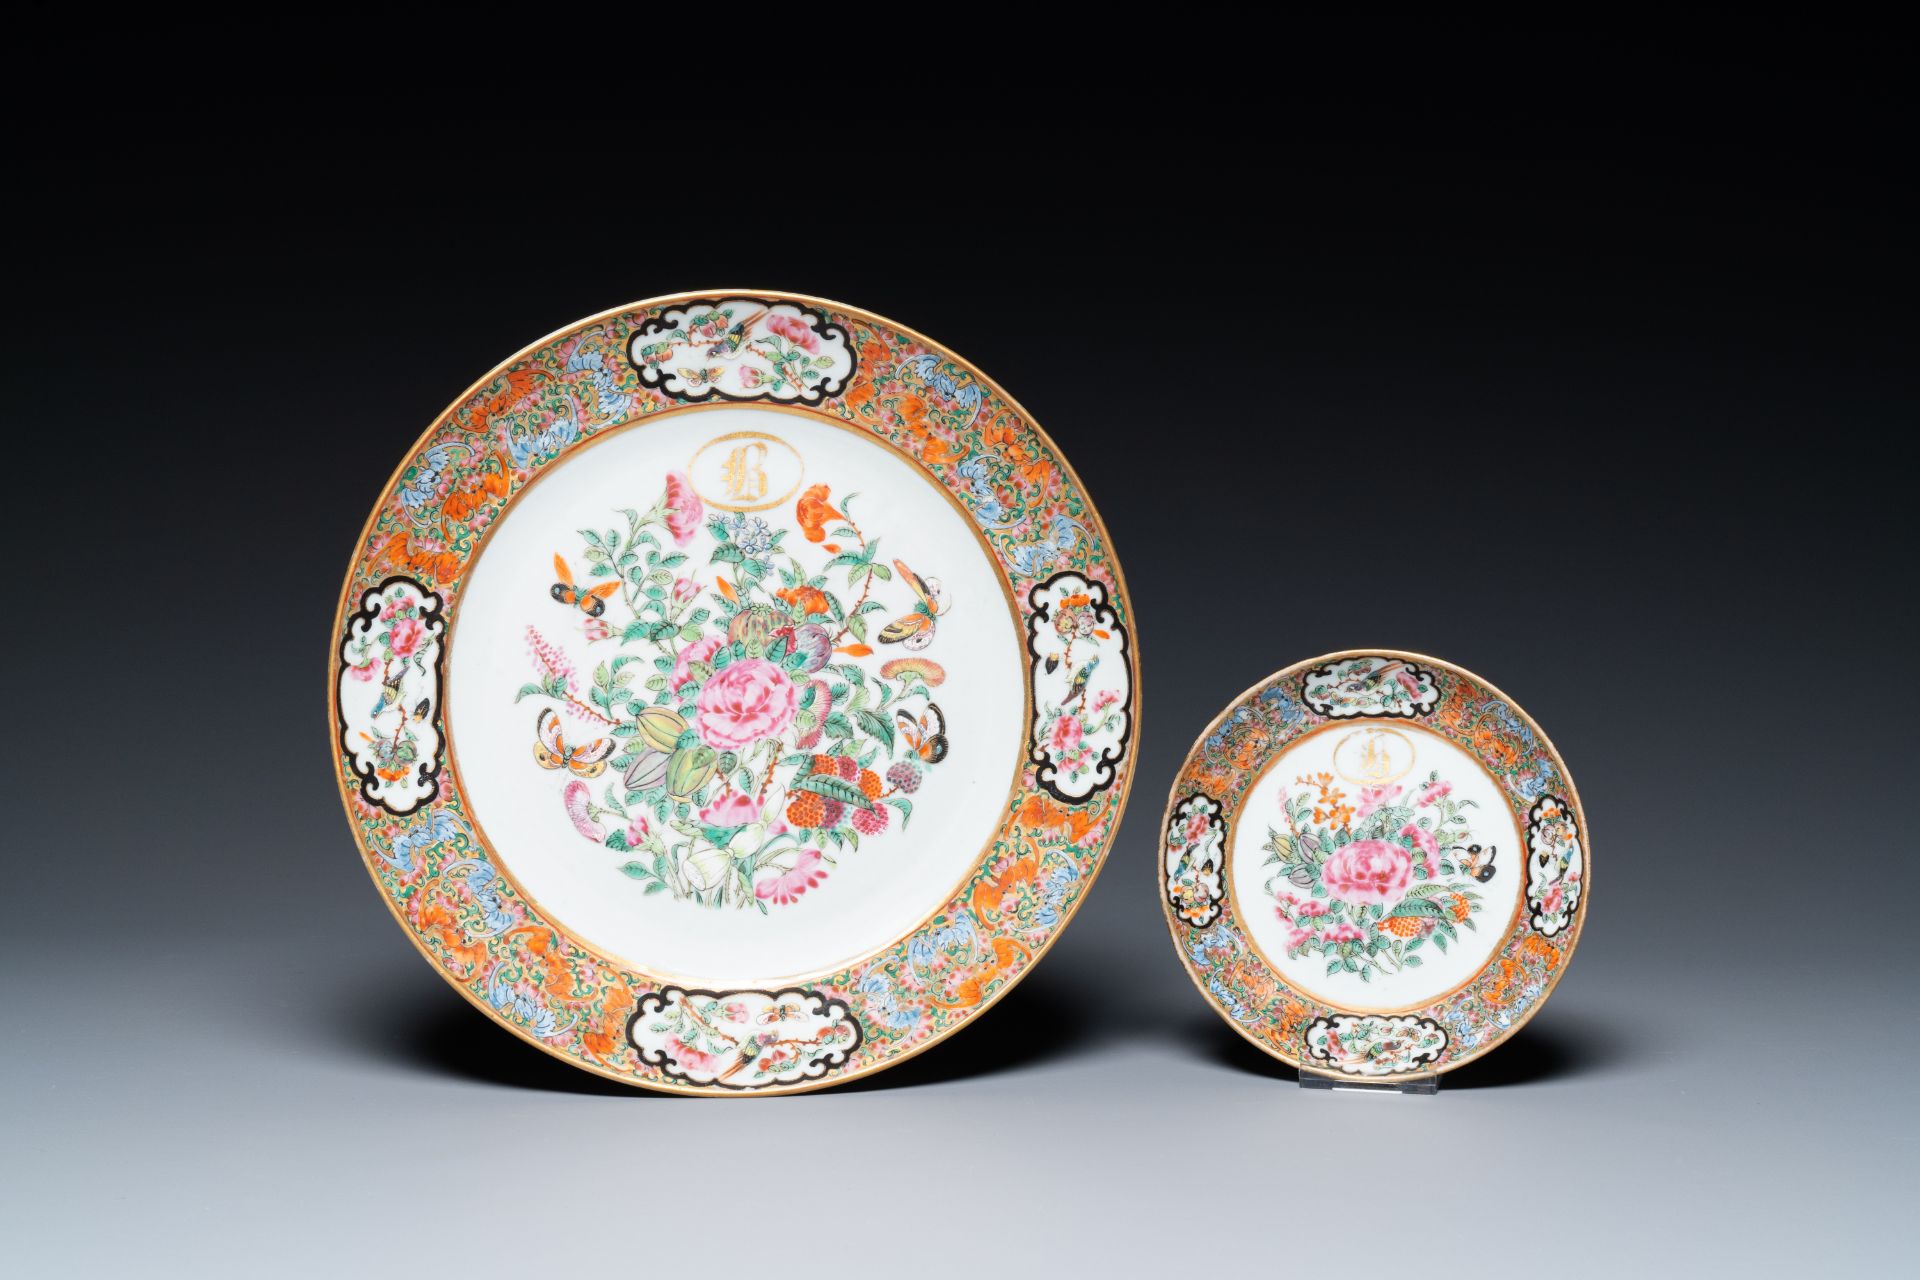 A varied collection of Chinese porcelain, 18/19th C. - Image 2 of 11